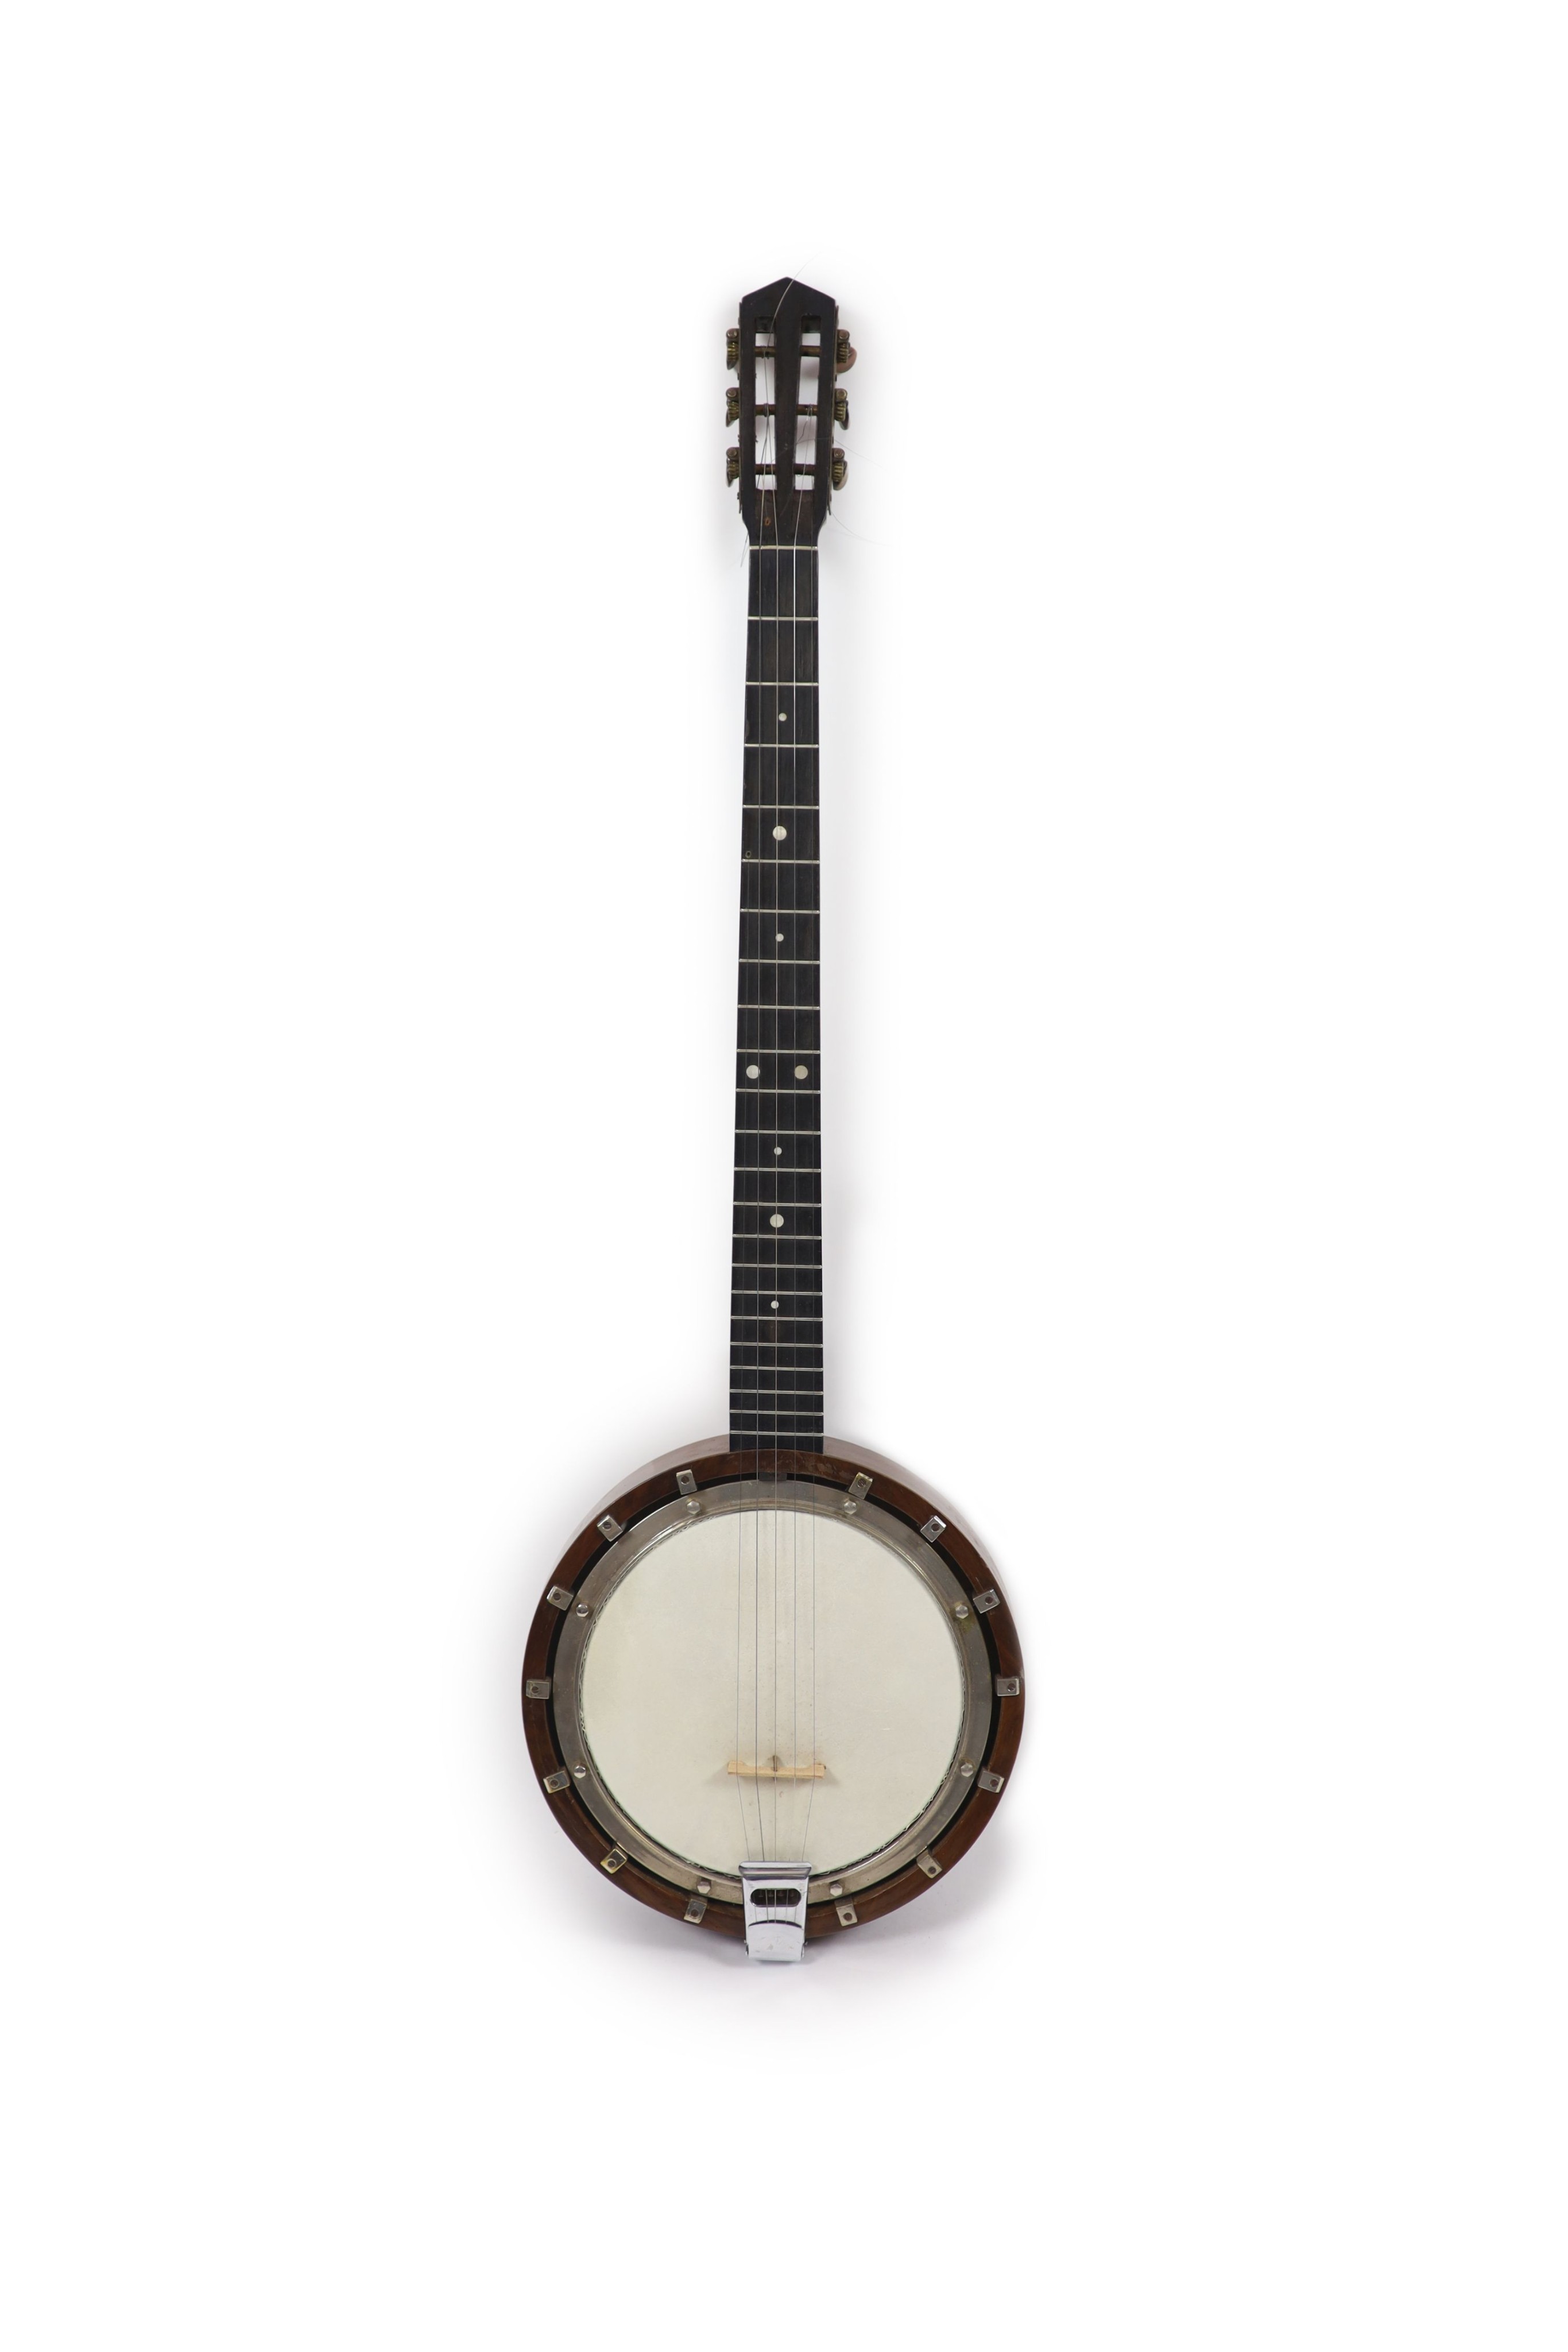 A Clifford Essex banjo overall 90cm, with distressed leather case